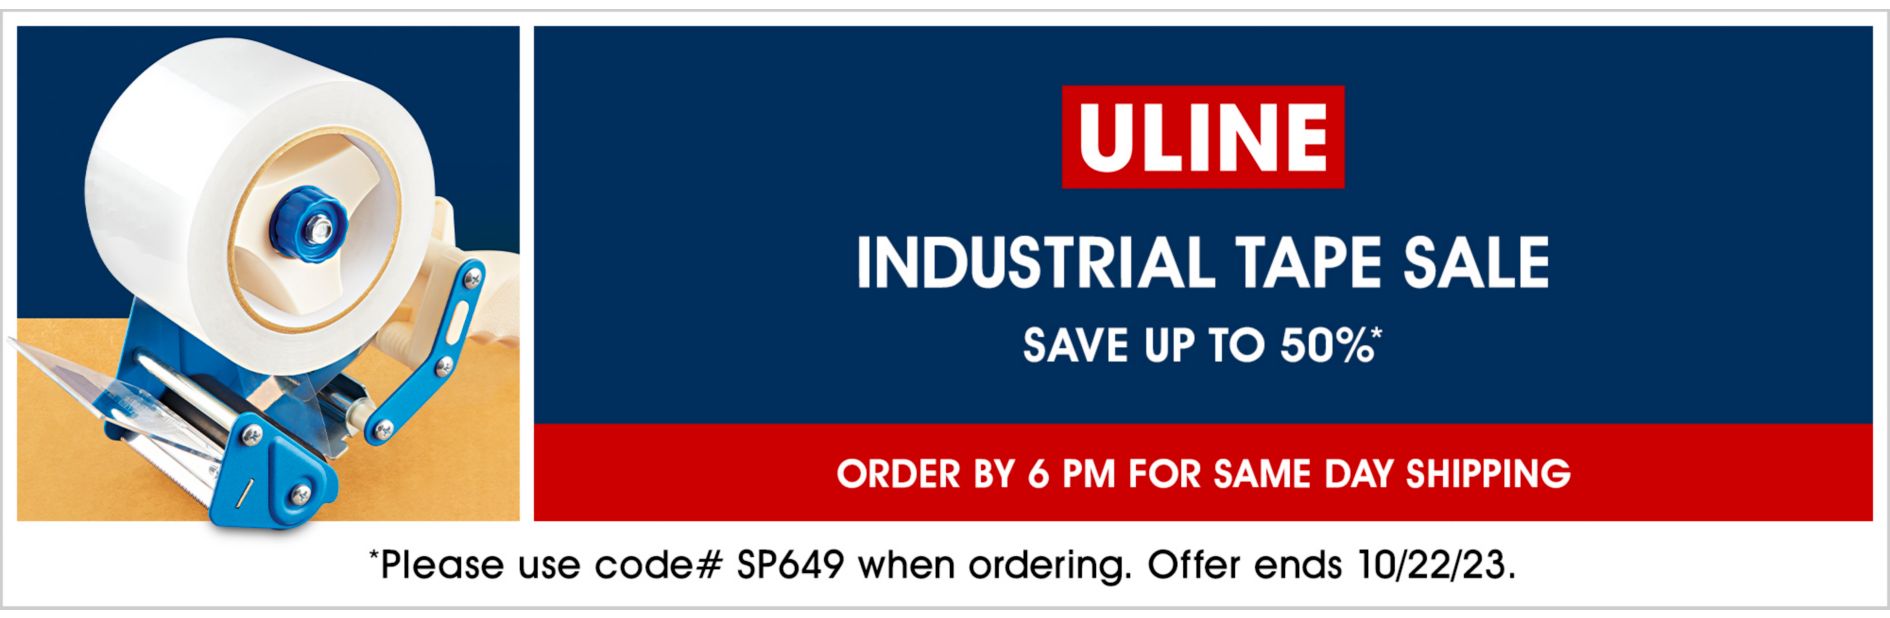 SP649 Industrial Tape Sale, Save up to 50%, Use code SP649, Offer ends 10/22/23